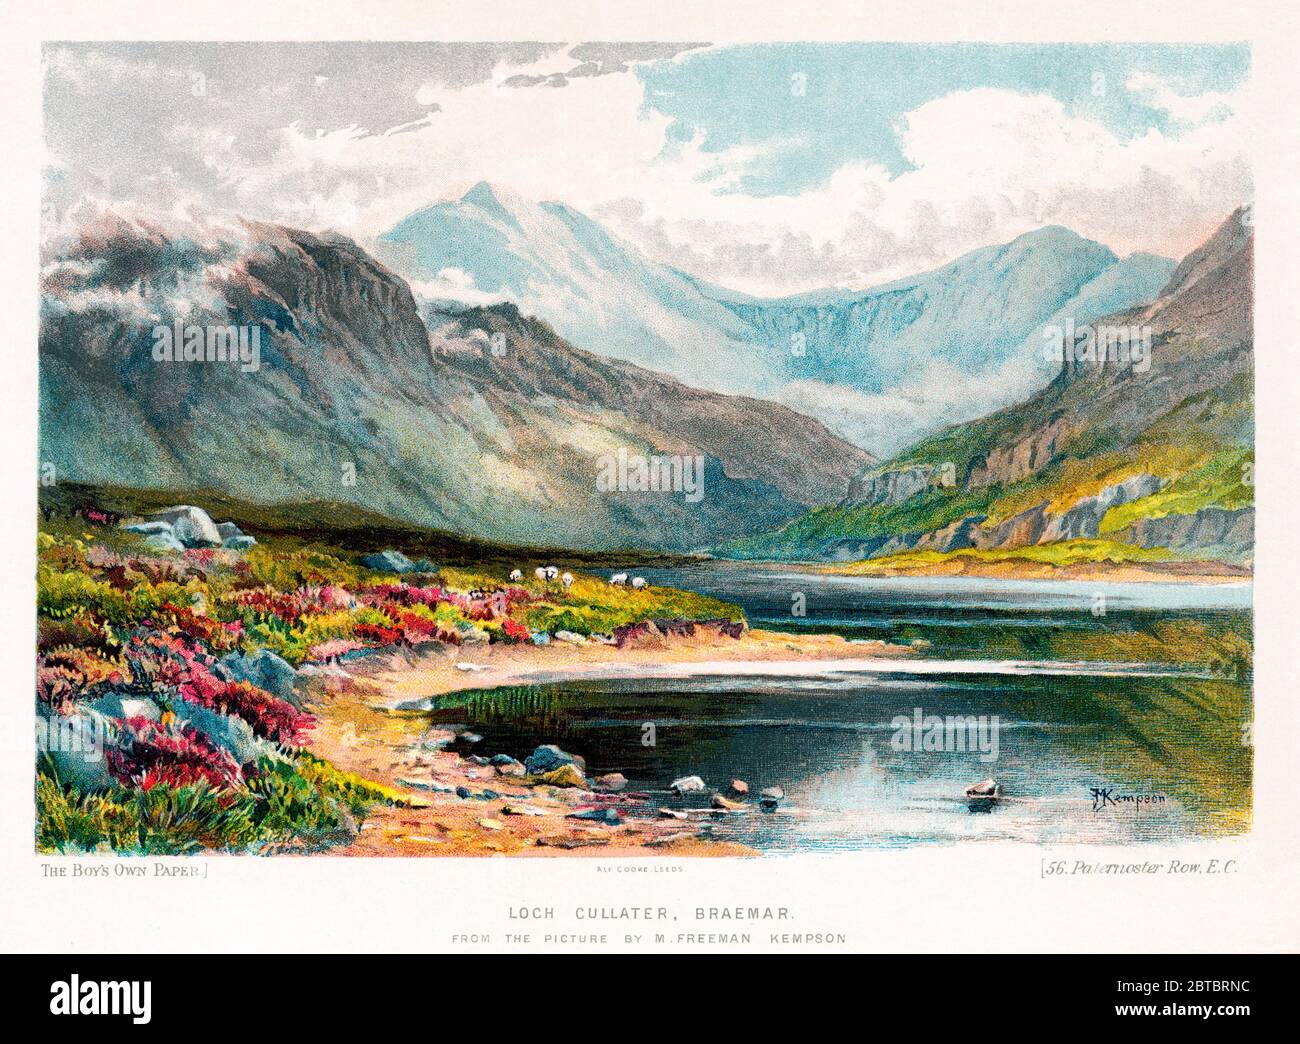 Loch Callater, Braemar, Victorian watercolour of the freshwater loch just south of Braemar in the Scottish Highlands, painted by M Freeman Kempson and reproduced in the Boys Own paper Stock Photo